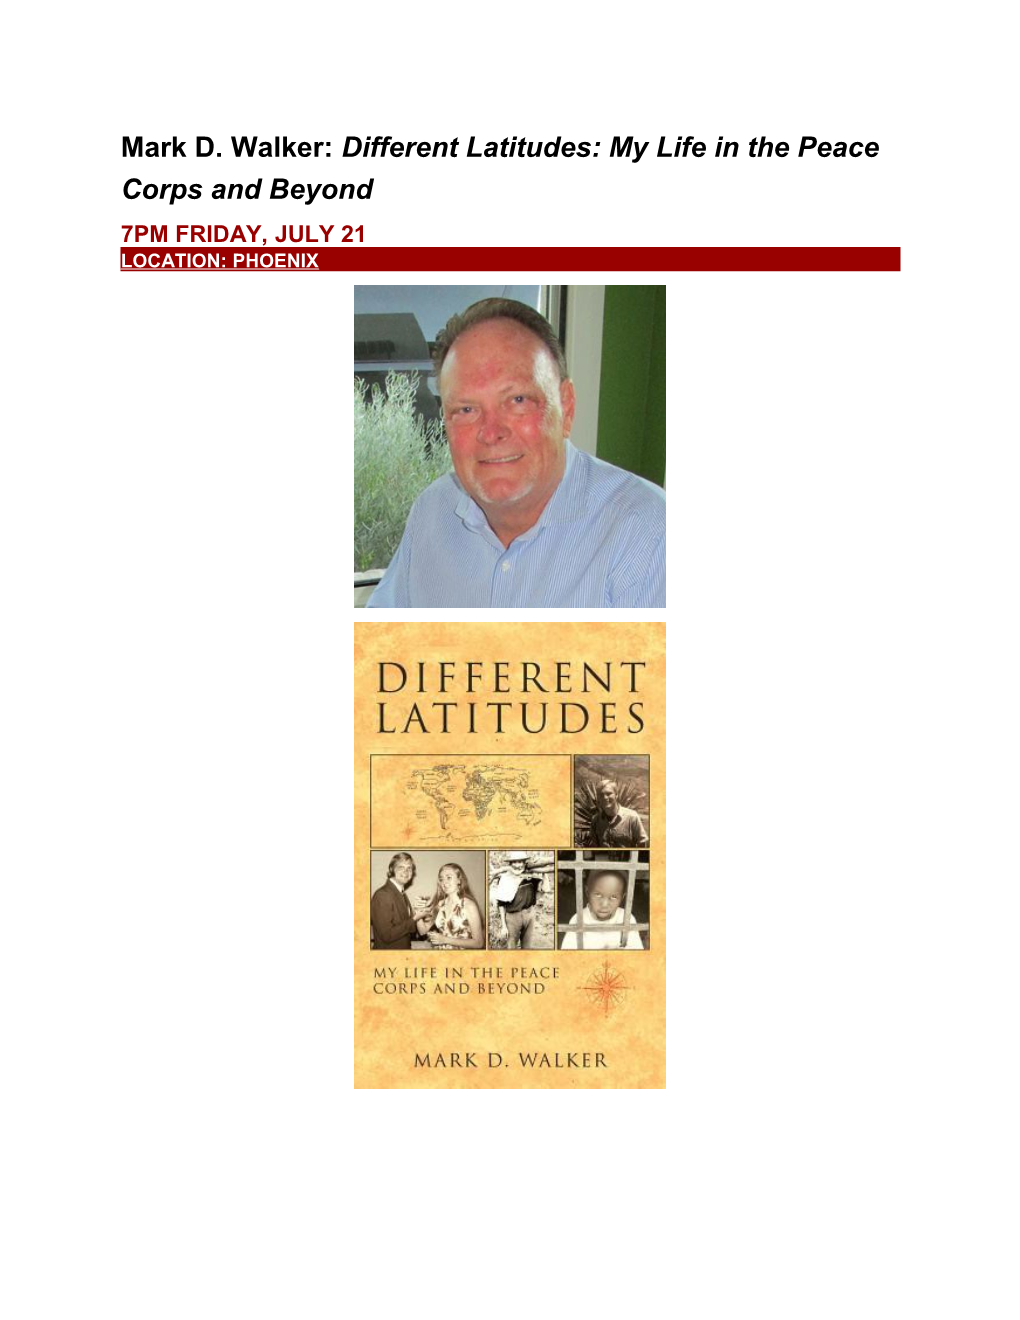 Mark D. Walker: Different Latitudes: My Life in the Peace Corps and Beyond 7PM FRIDAY, JULY 21